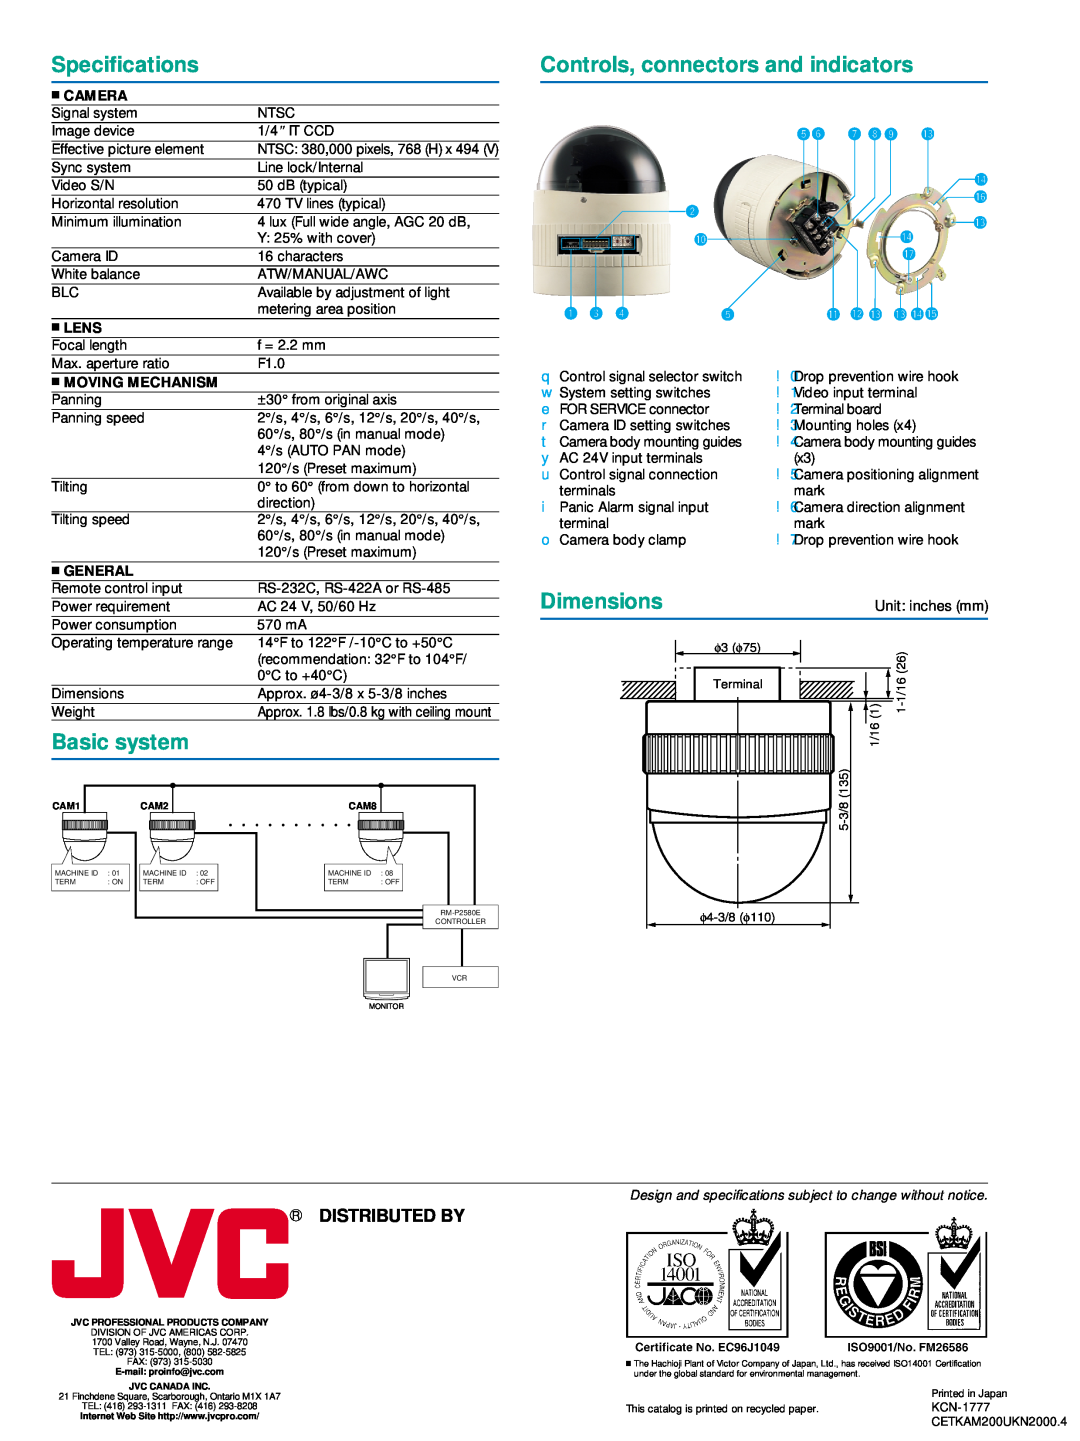 JVC TK-AM200U Specifications, Controls, connectors and indicators, Dimensions, Basic system, R Distributed By,  Camera 